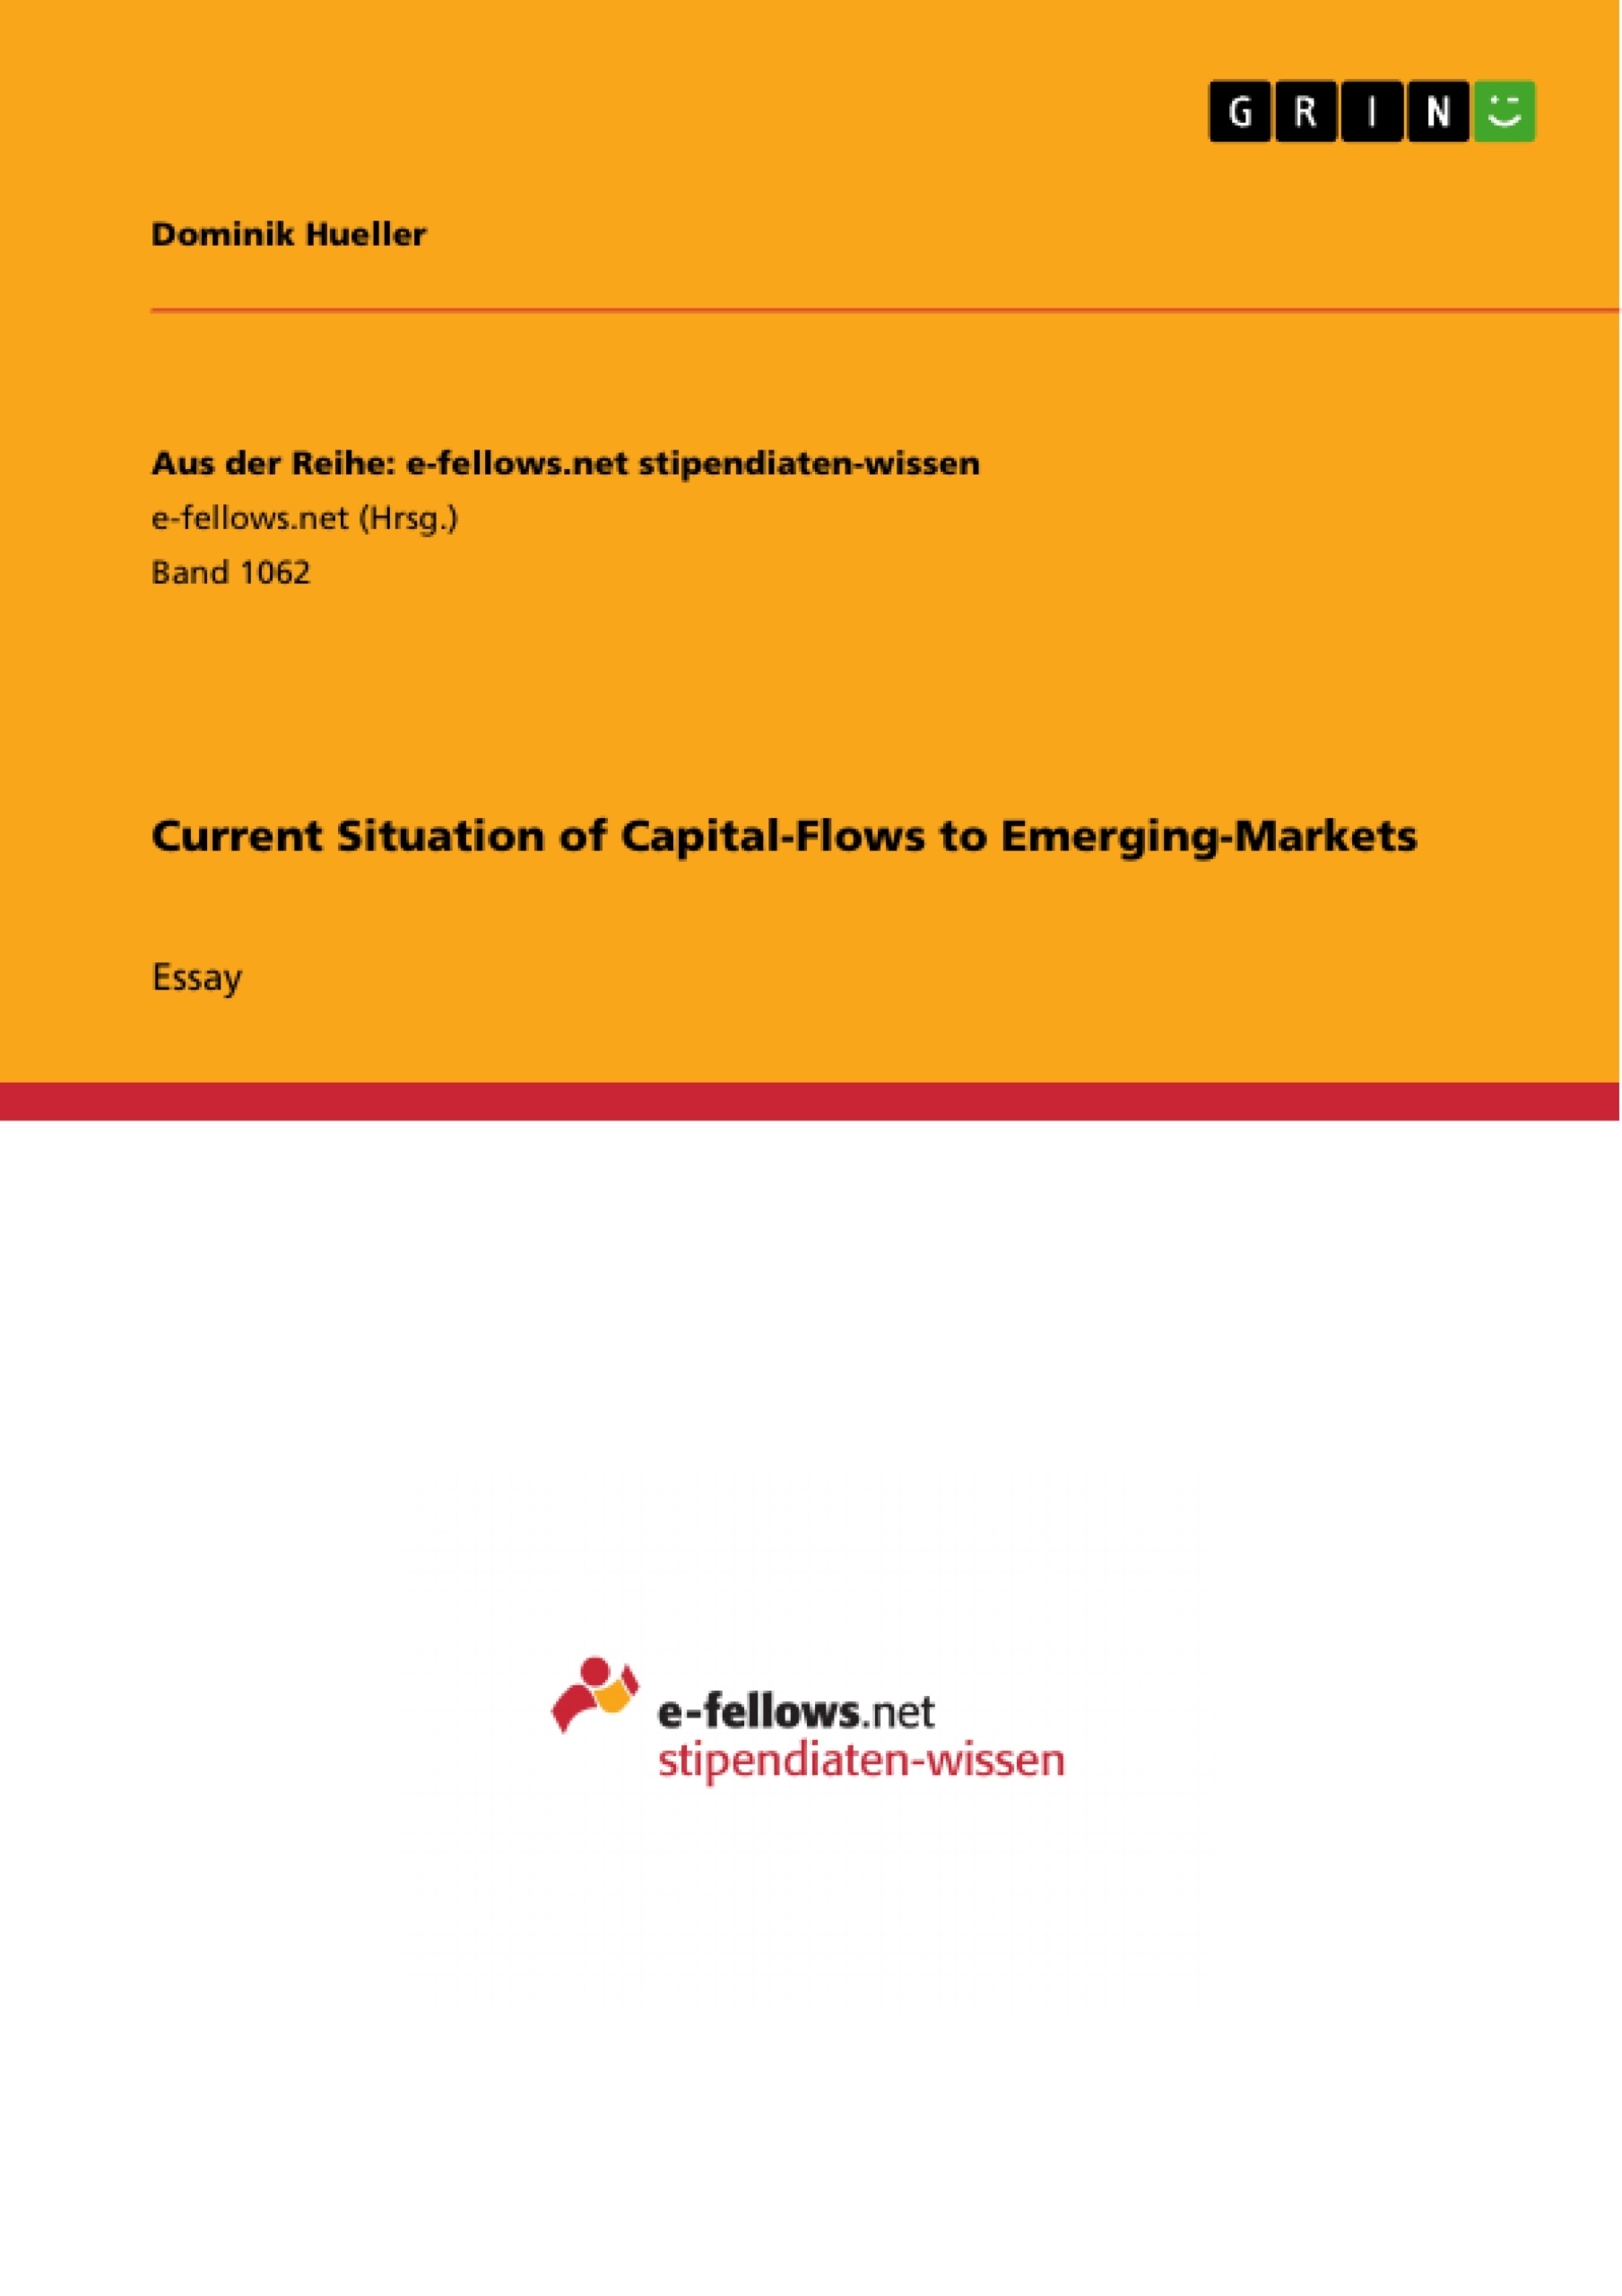 Title: Current Situation of Capital-Flows to Emerging-Markets